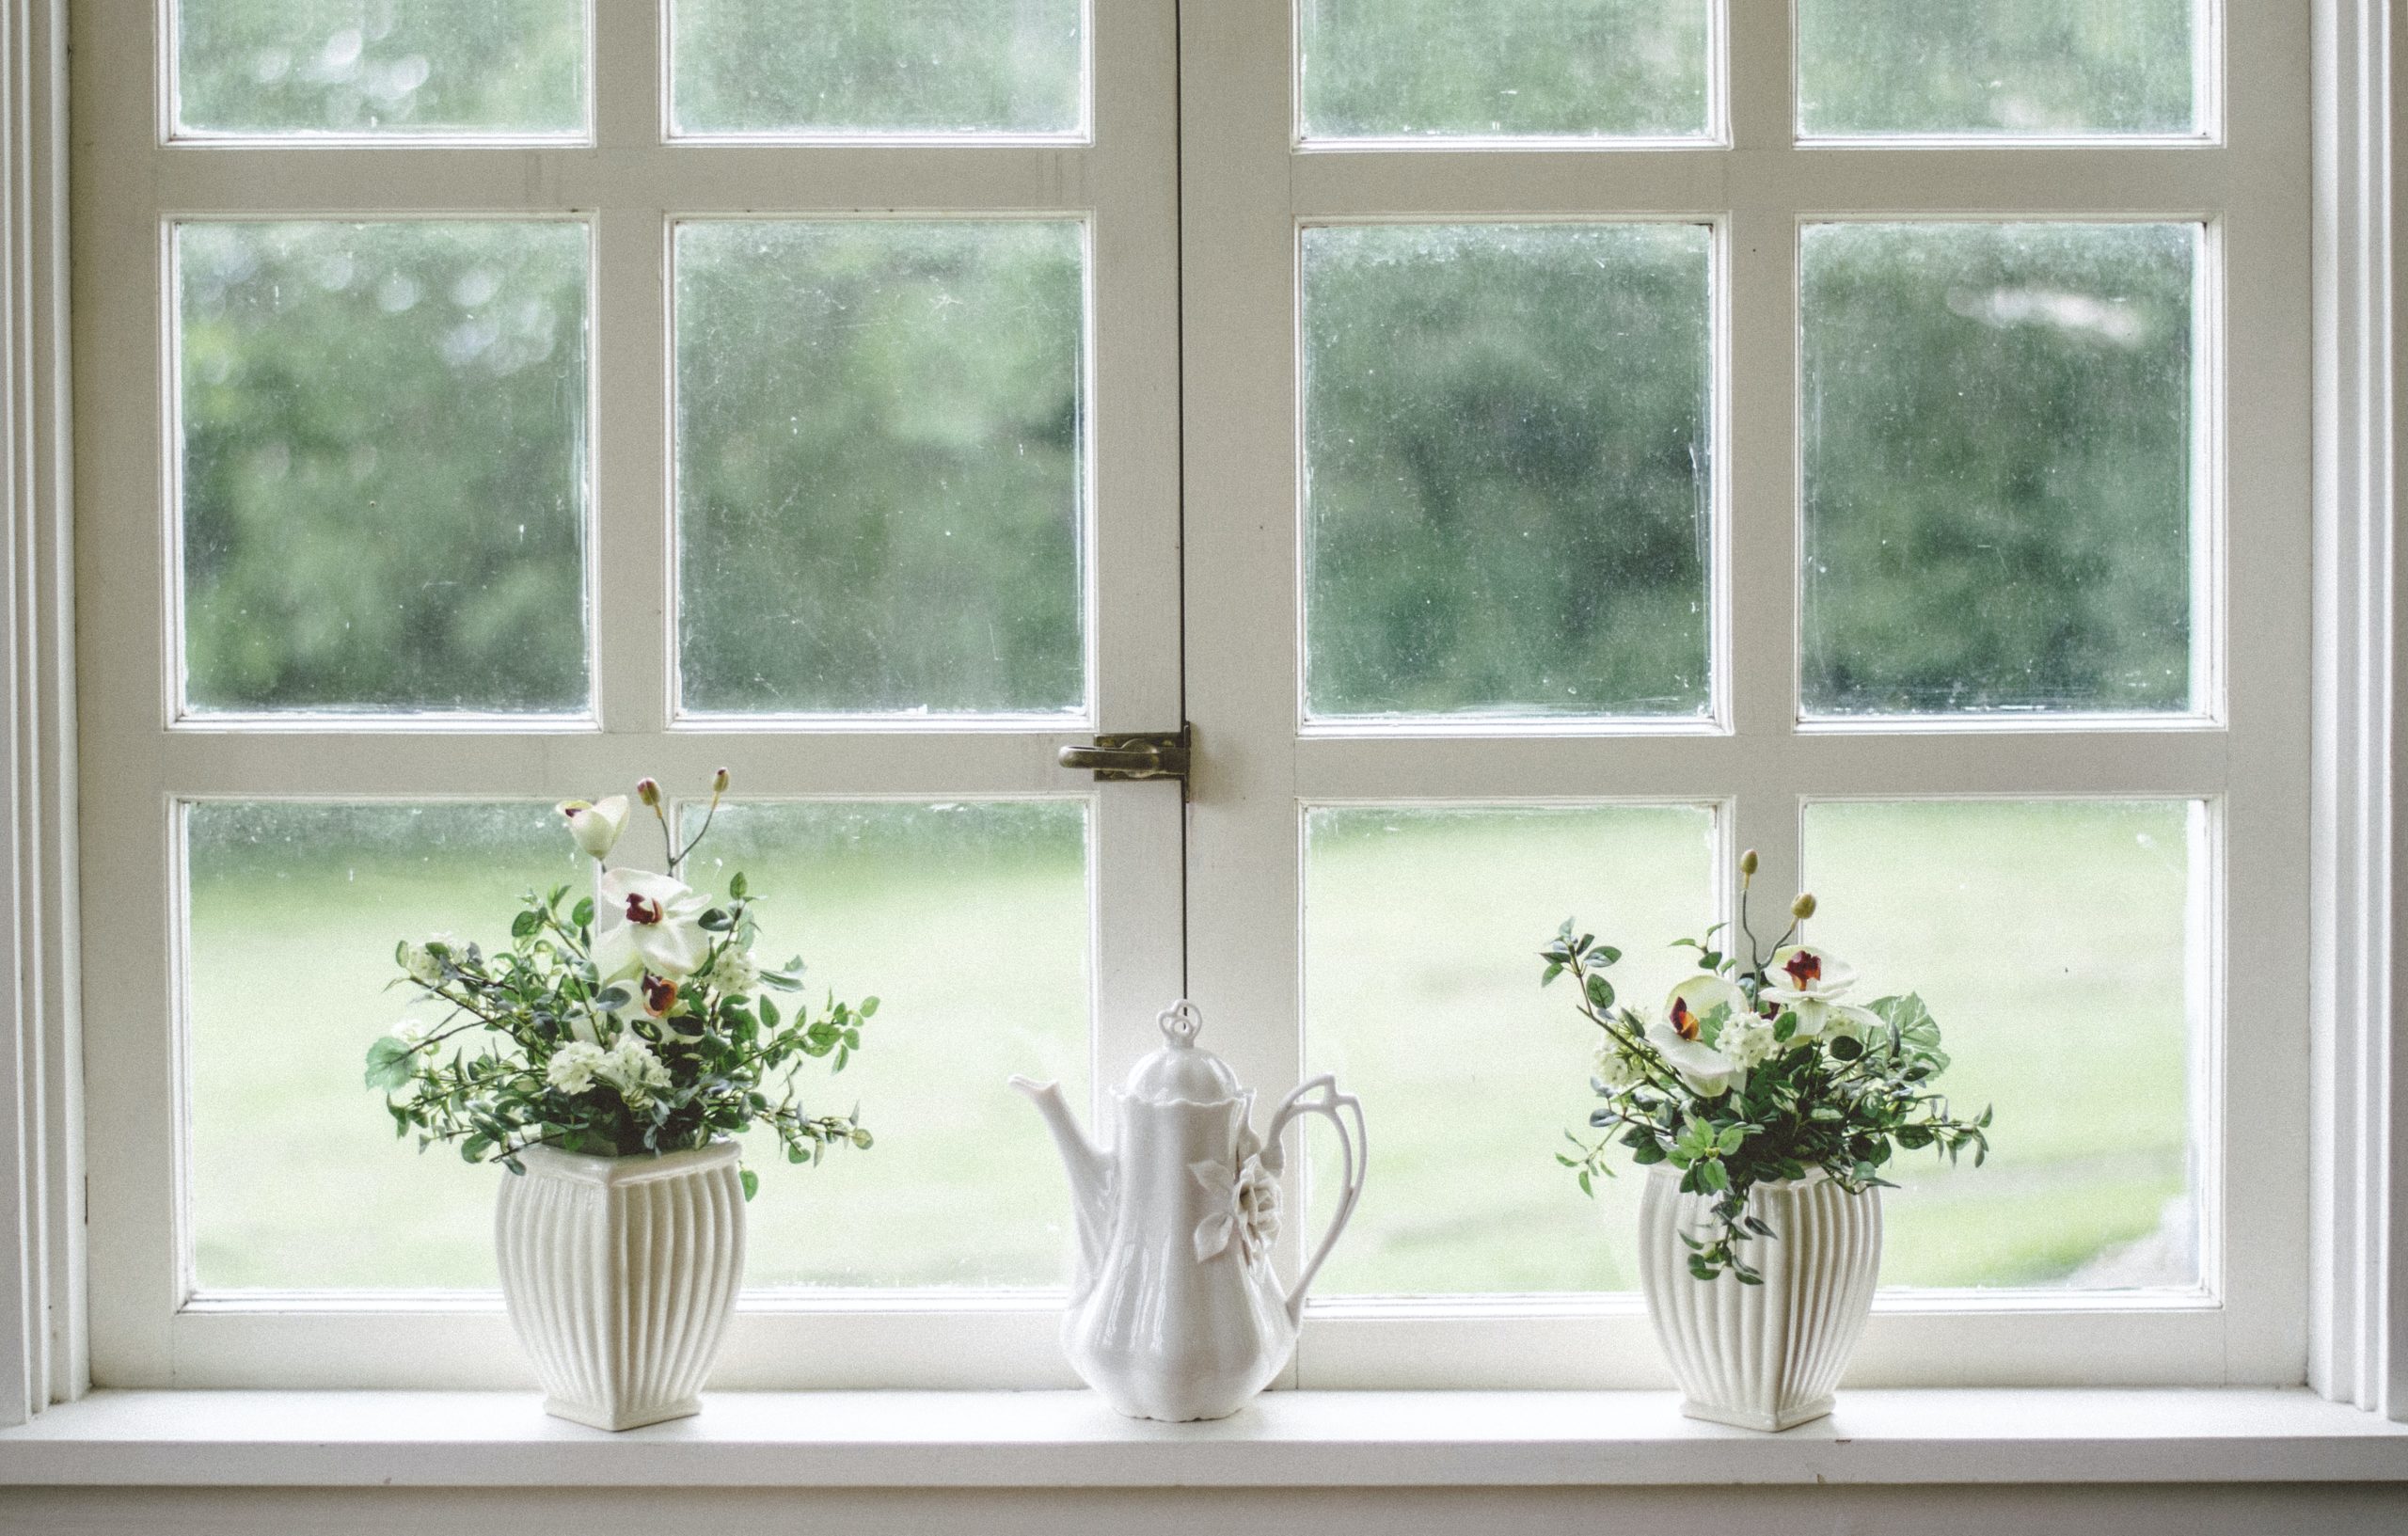 Get Your Home Ready For Warmer Weather With These 7 Tips